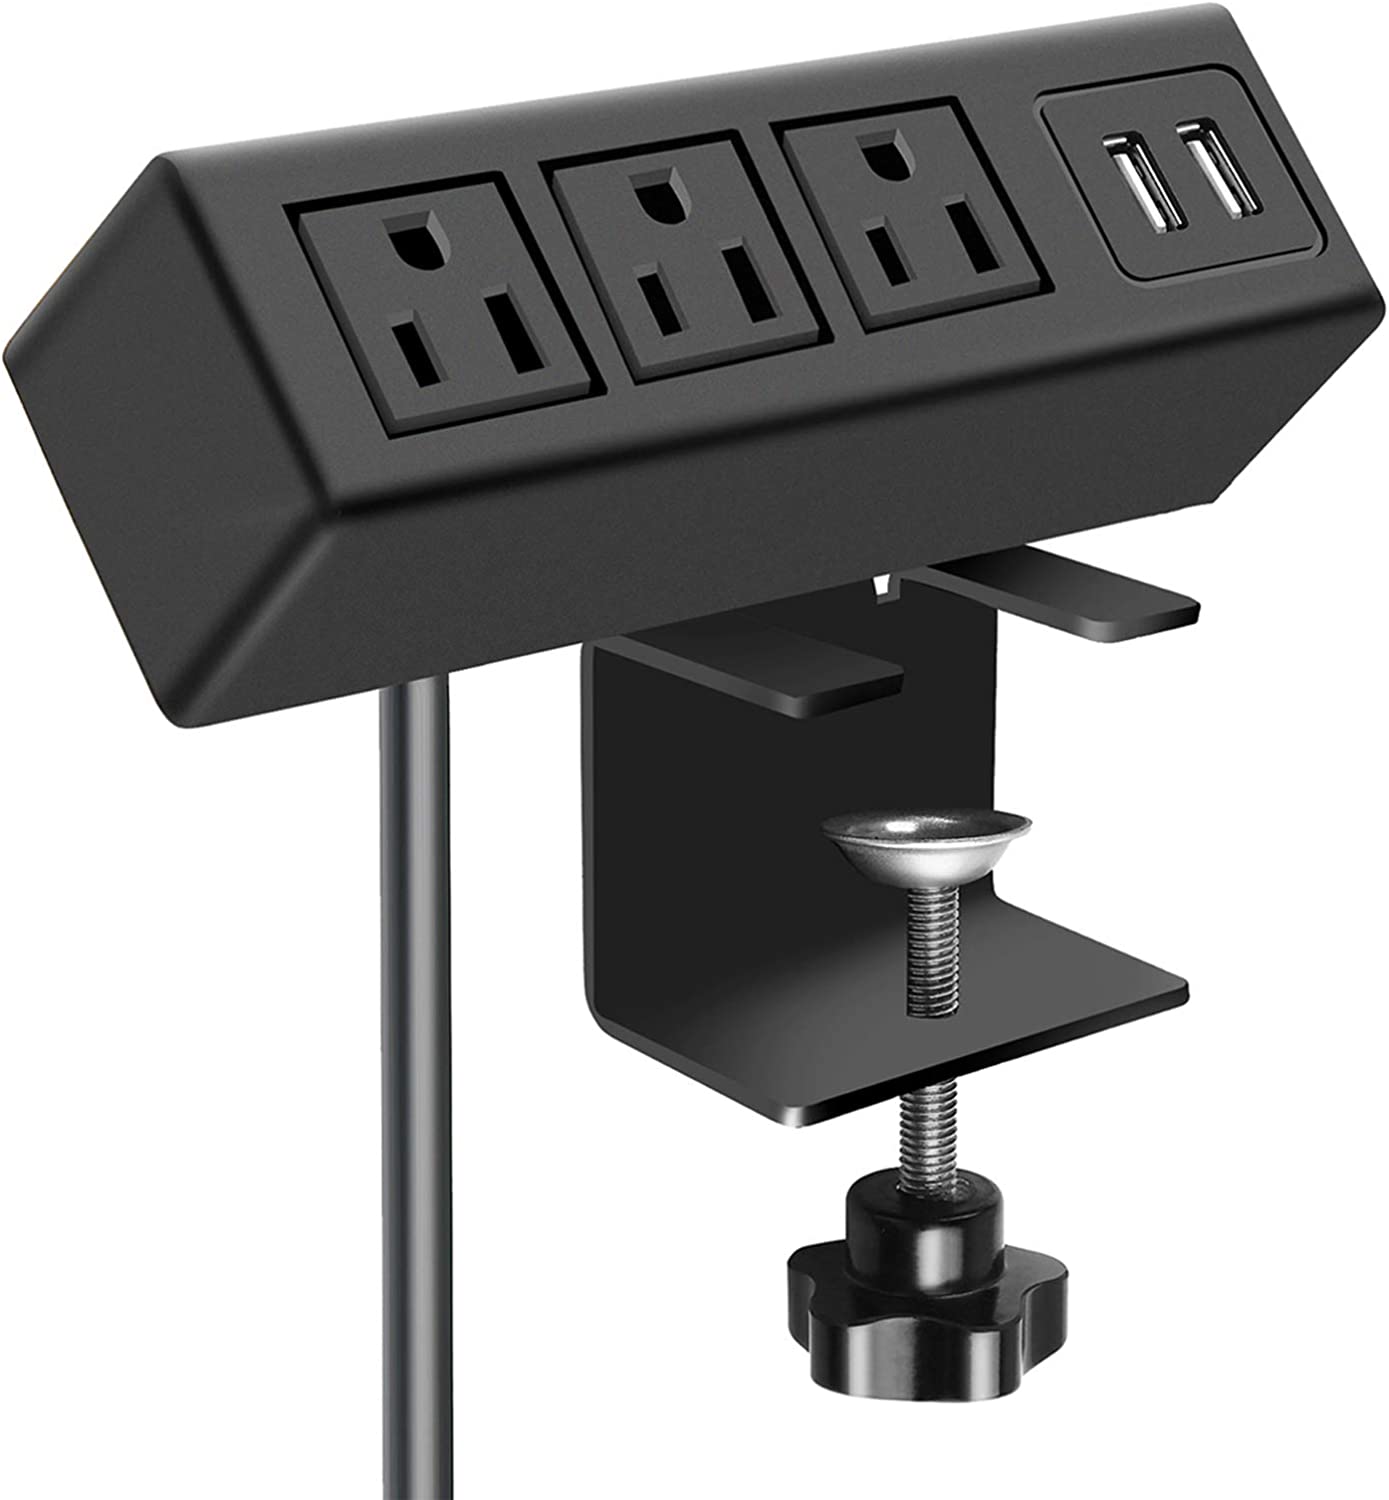 3-Outlet CCCEI 1200J Desk Clamp Power Strip w/ 2 USB Ports $7 + Free Shipping w/ Prime or Orders $25+